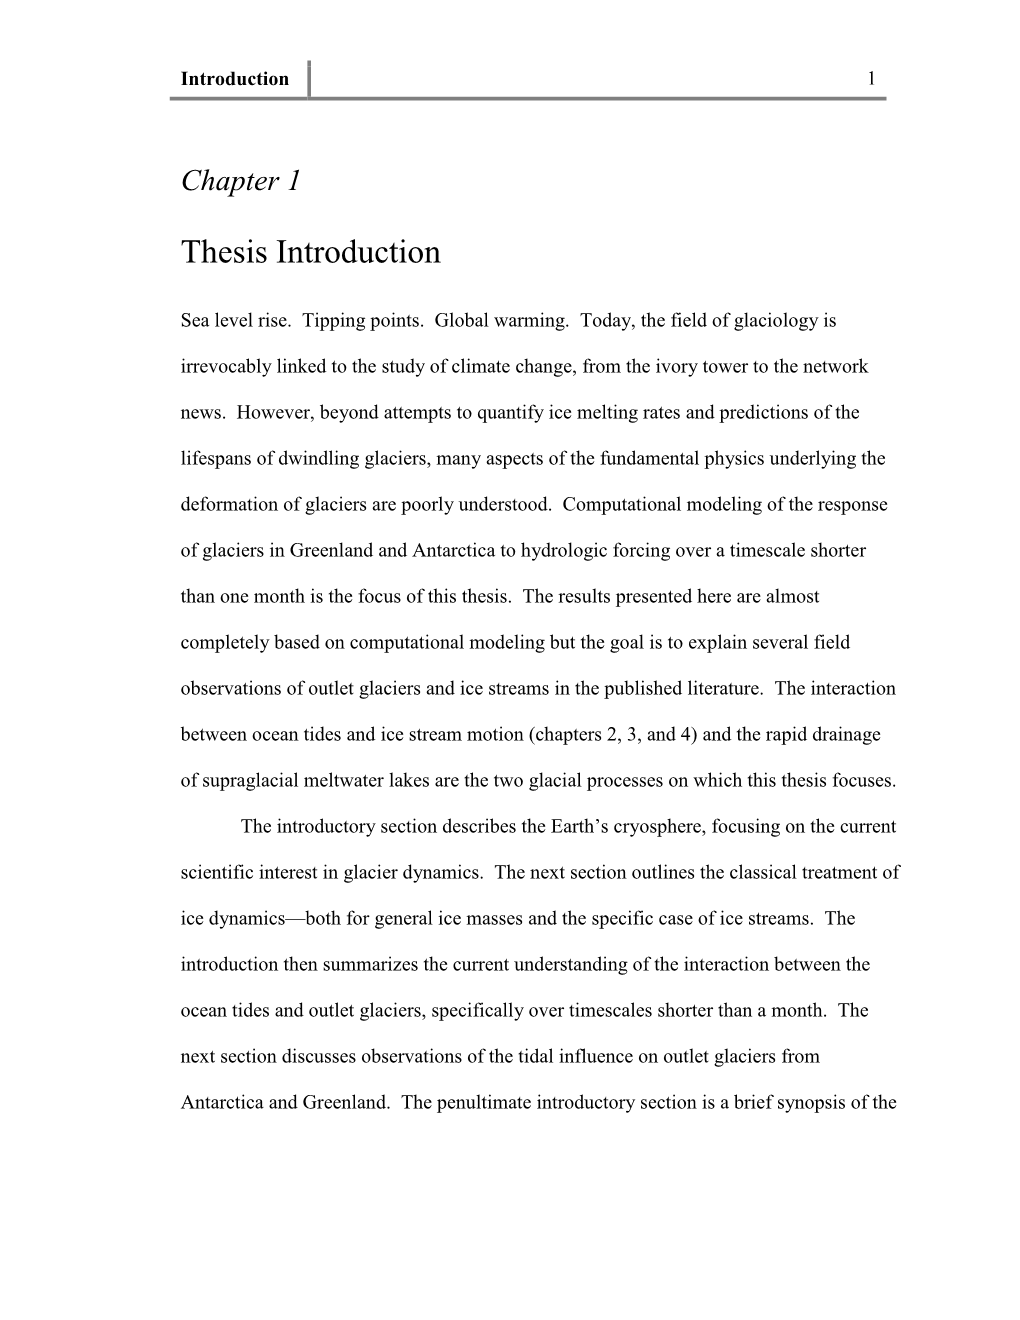 PDF (Chapter 1-Introduction)